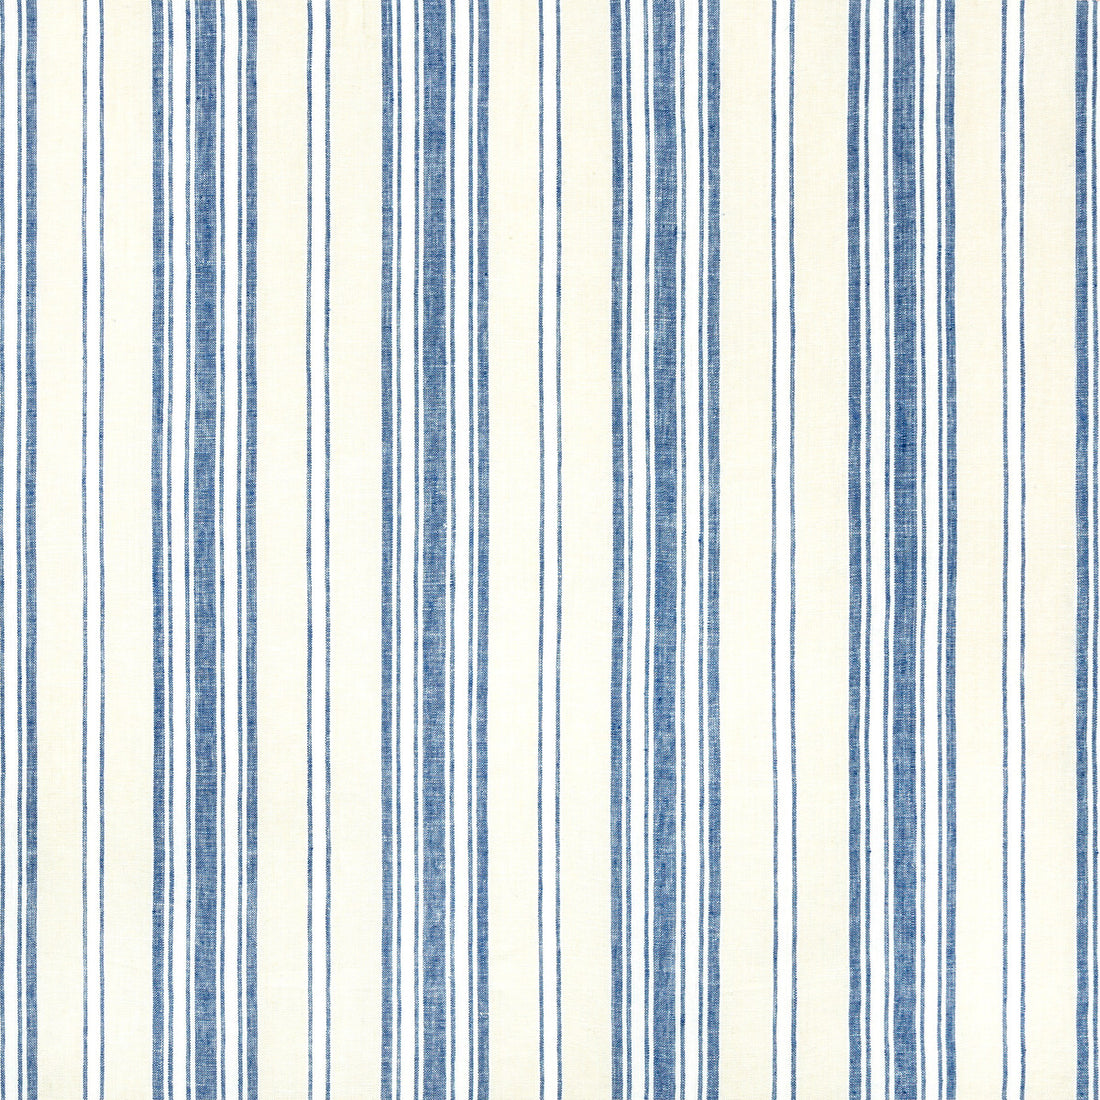 Laurel Stripe fabric in navy color - pattern 2020189.1650.0 - by Lee Jofa in the Avondale collection